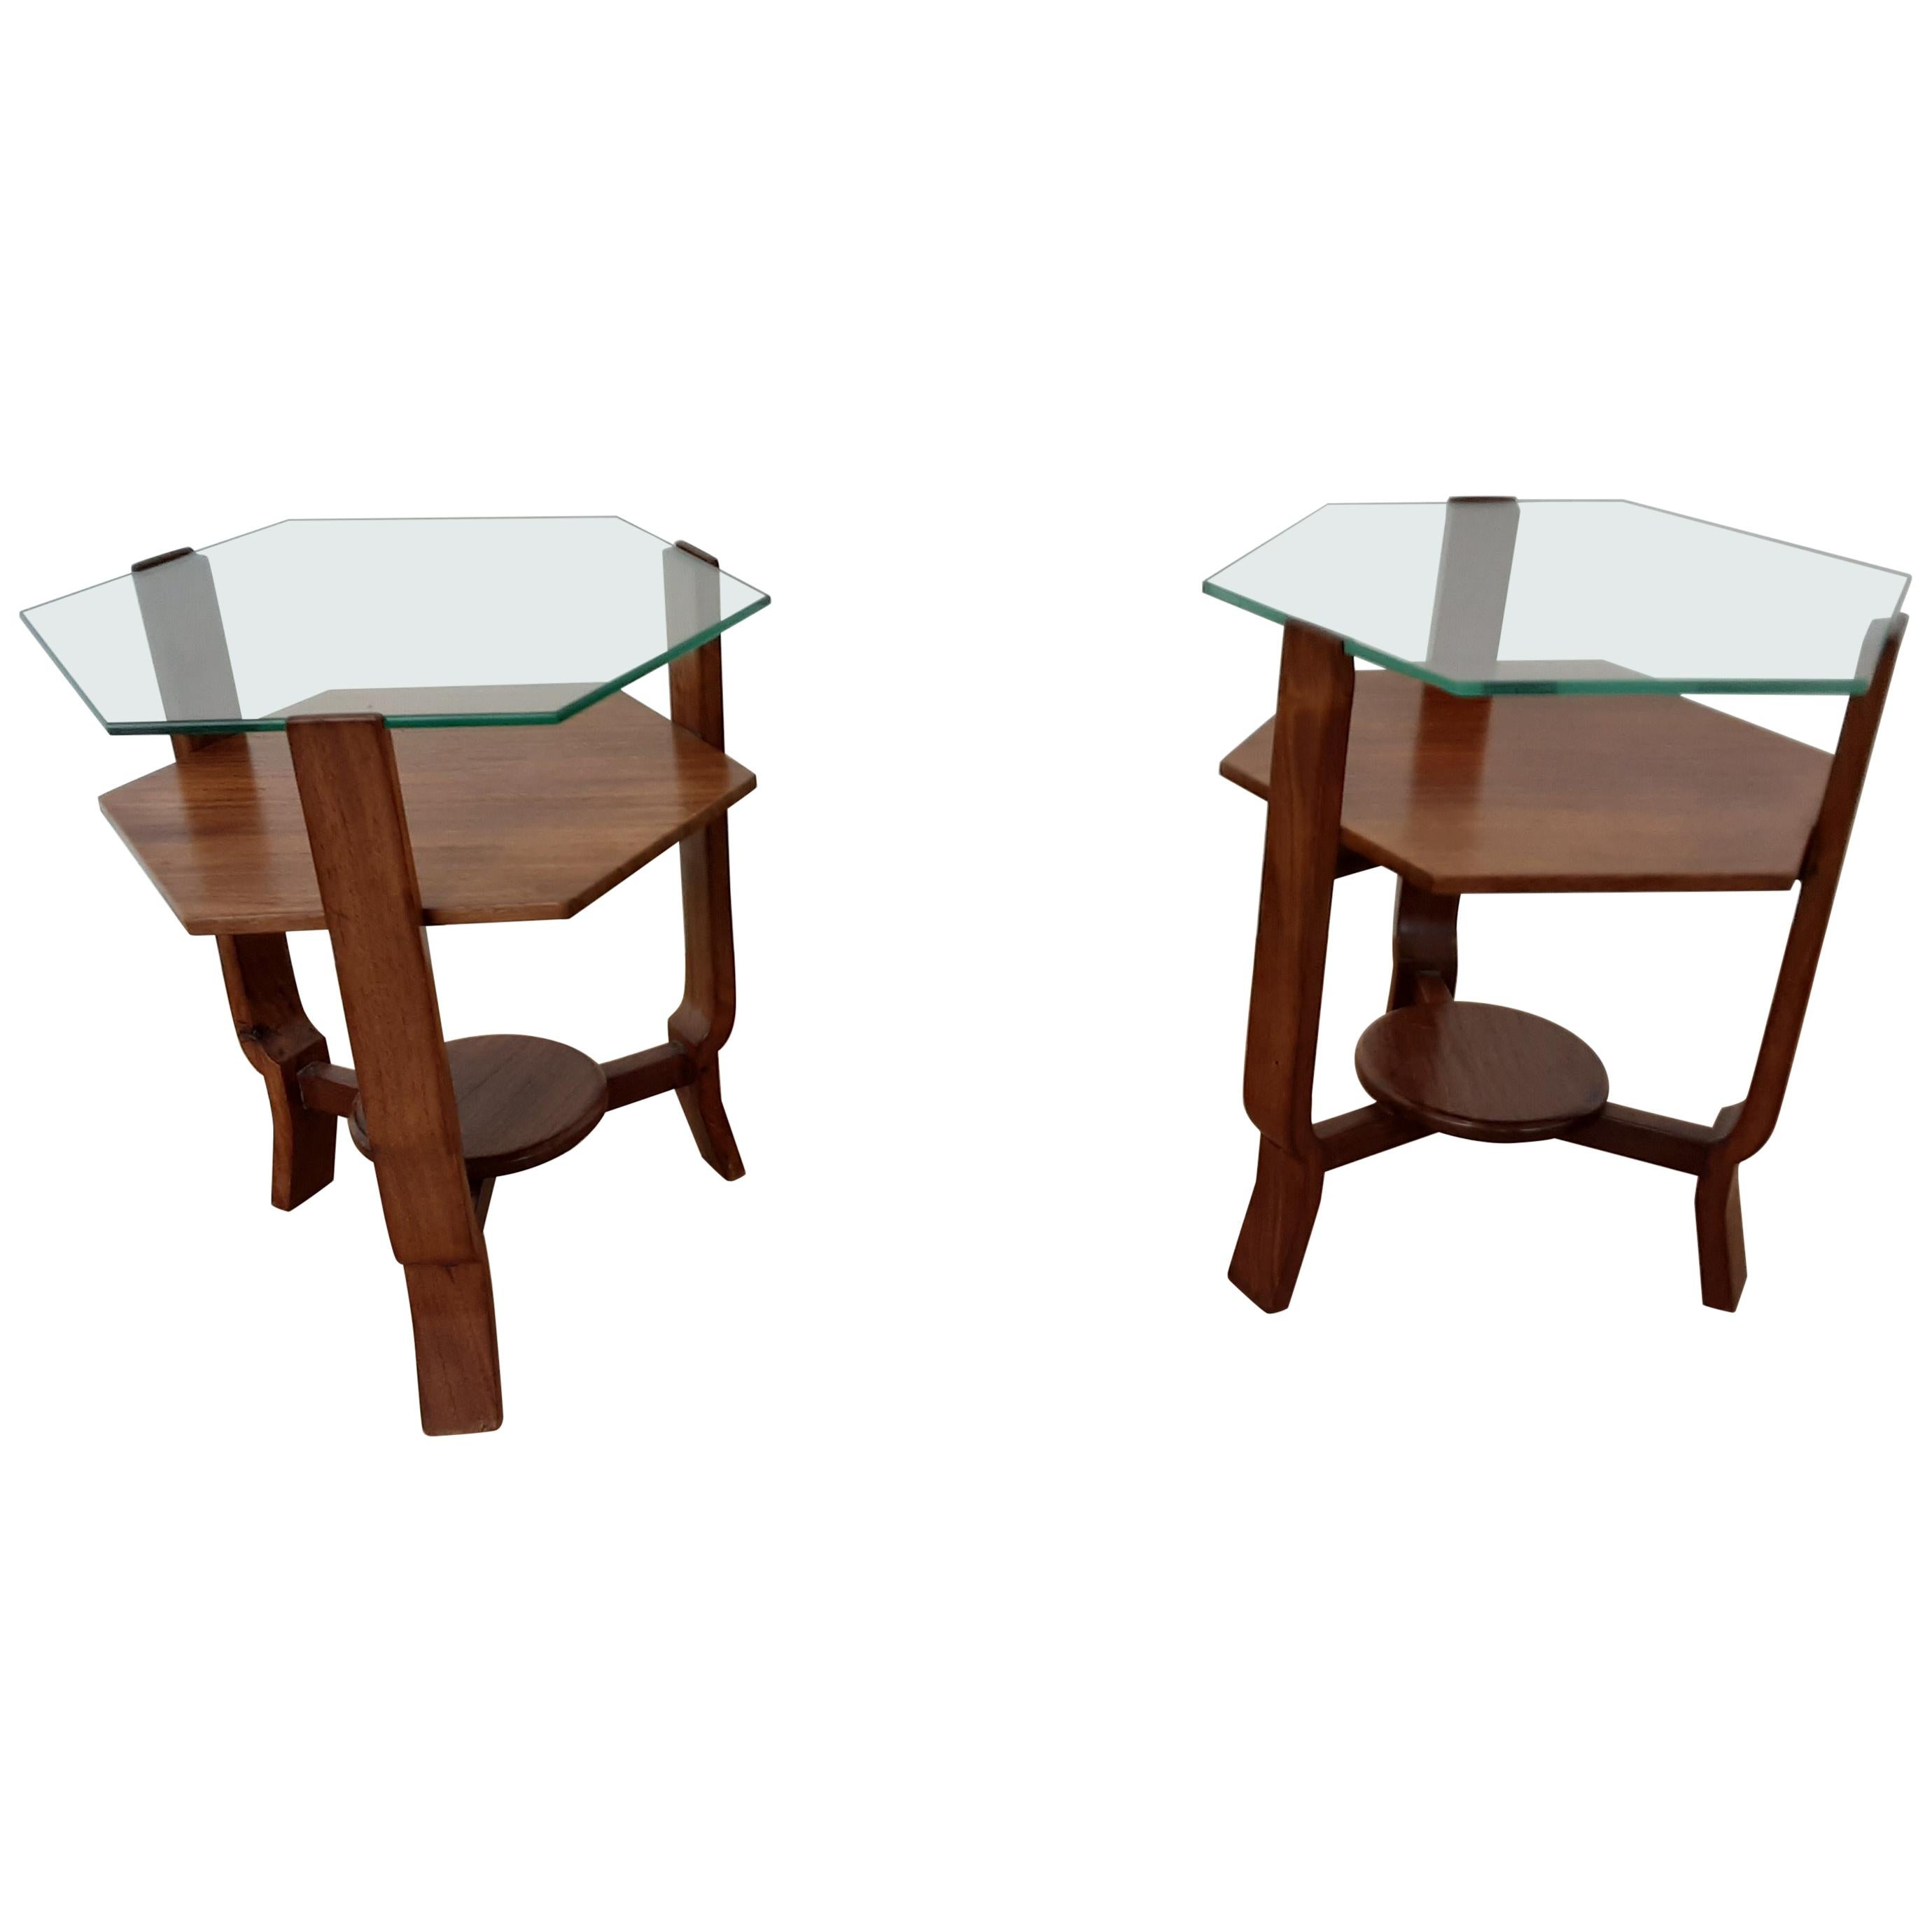 Pair of Glass Toped Walnut Side Tables British, circa 1930 For Sale